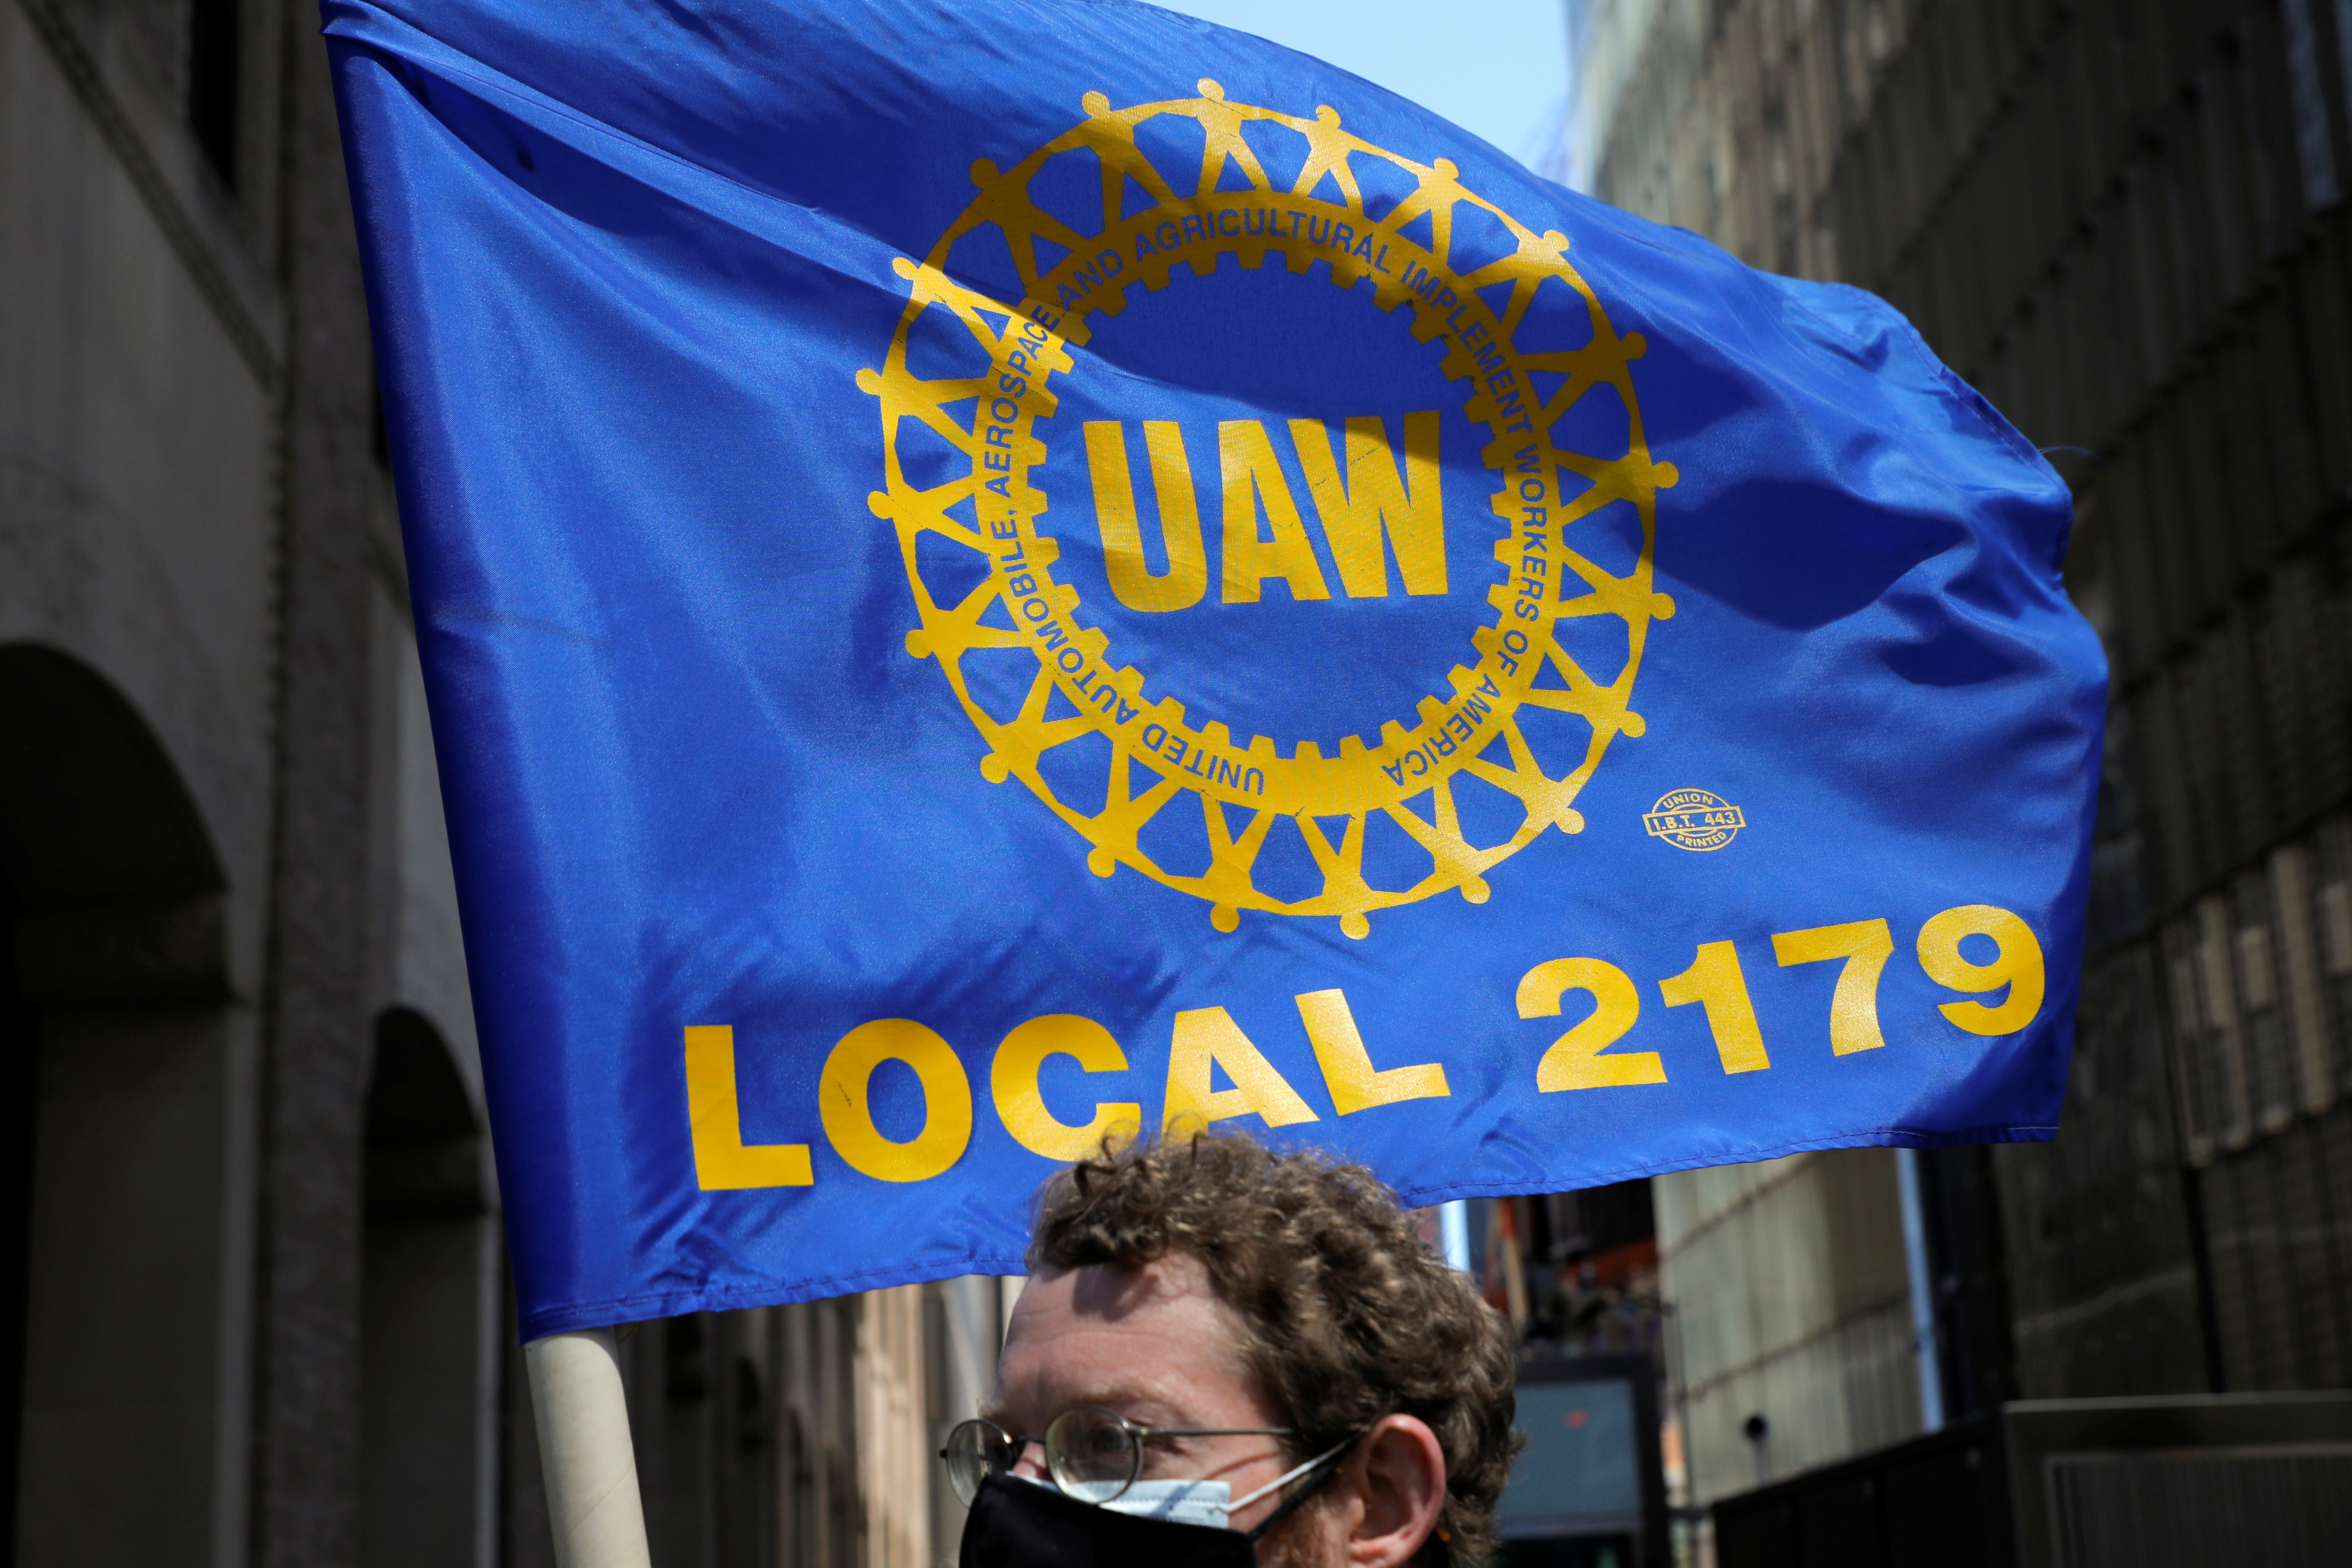 A person carries a flag with the patch from the United Auto Workers (UAW) labor union during a May Day rally for media workers held by The NewsGuild of New York on International Workers' Day in Manhattan, New York City, New York, U.S., May 1, 2021. REUTERS/Andrew Kelly